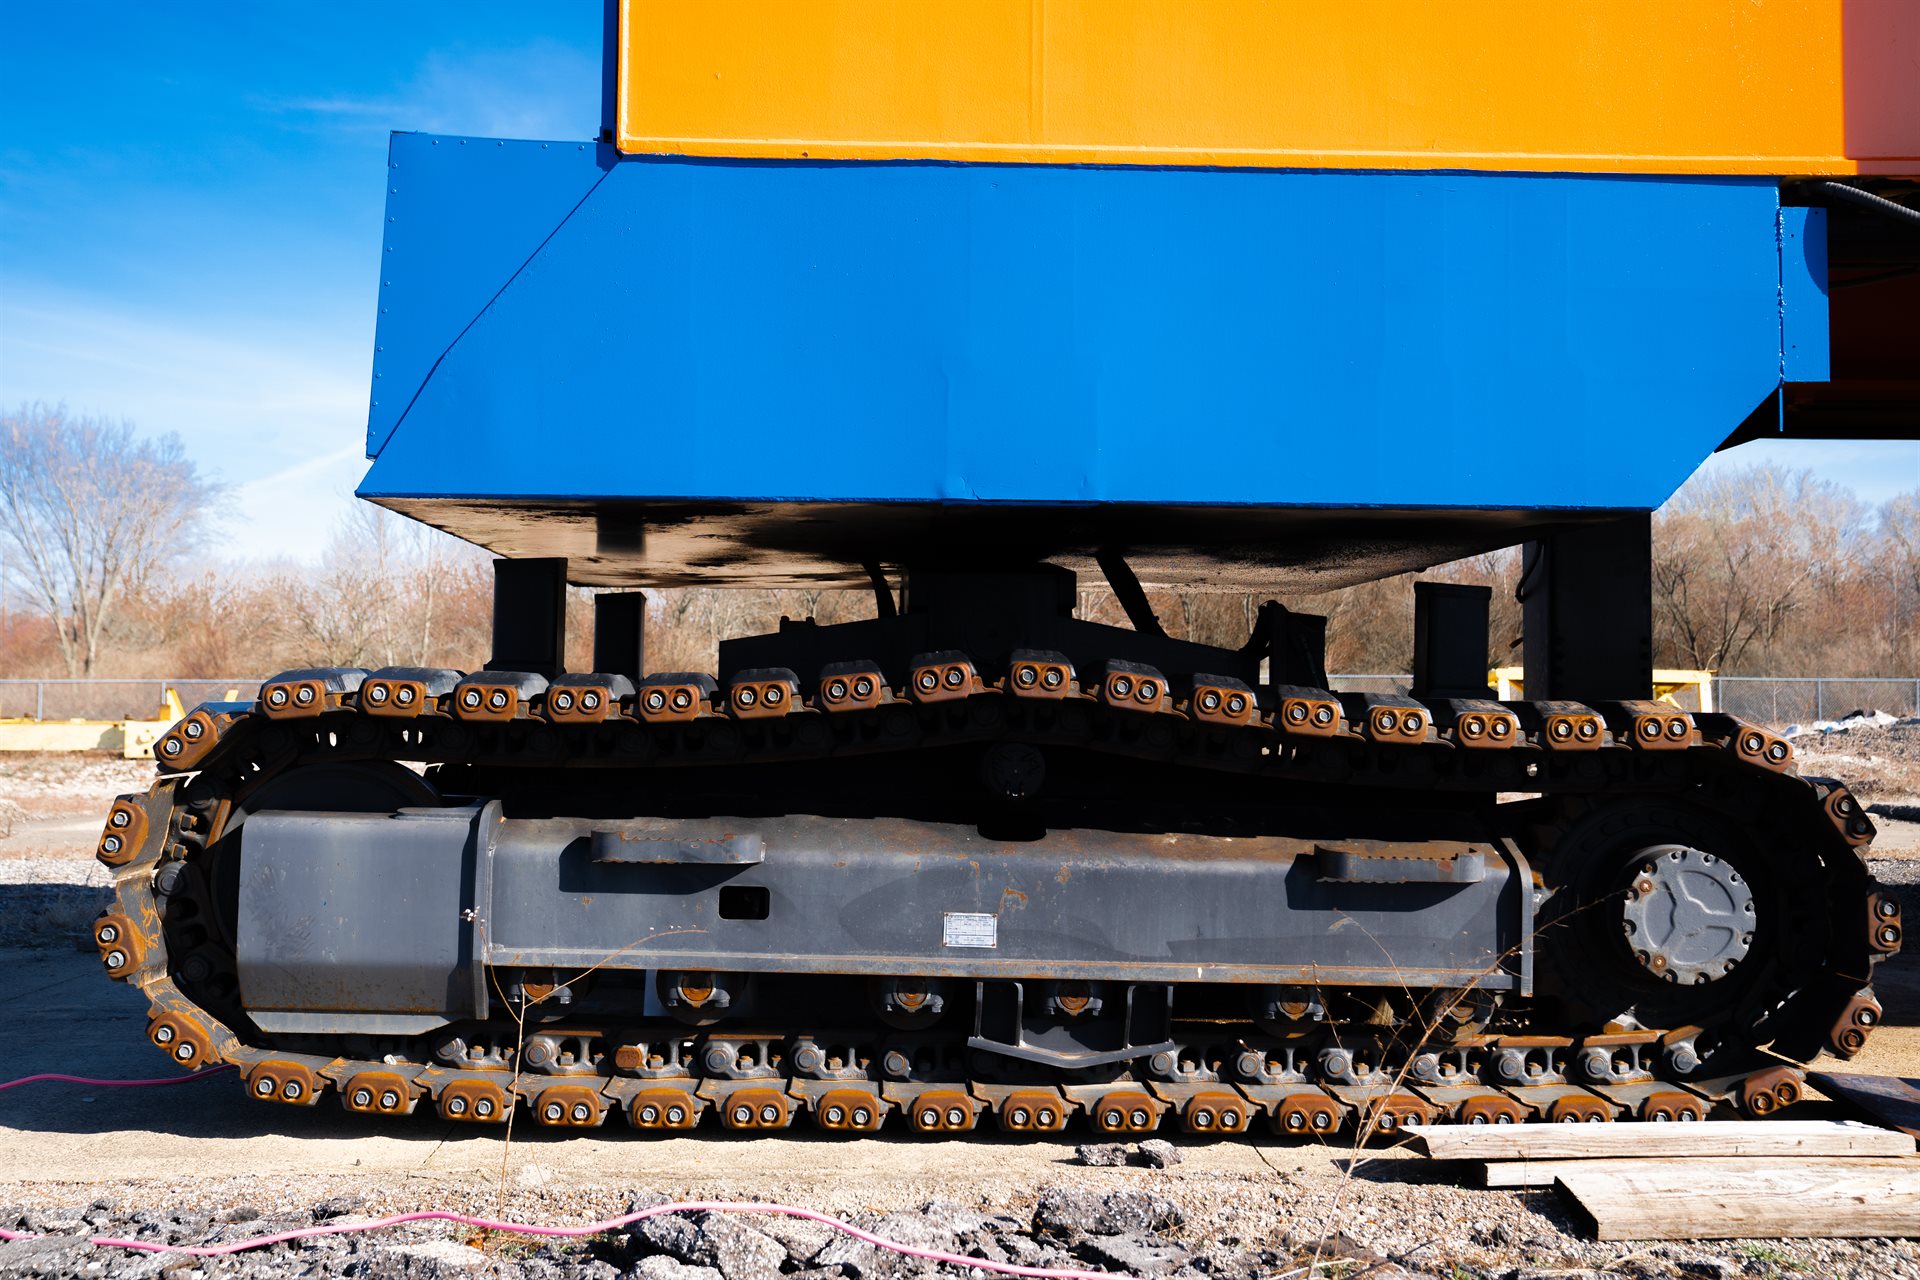 The crawler track system allows for easy relocation between test sections.